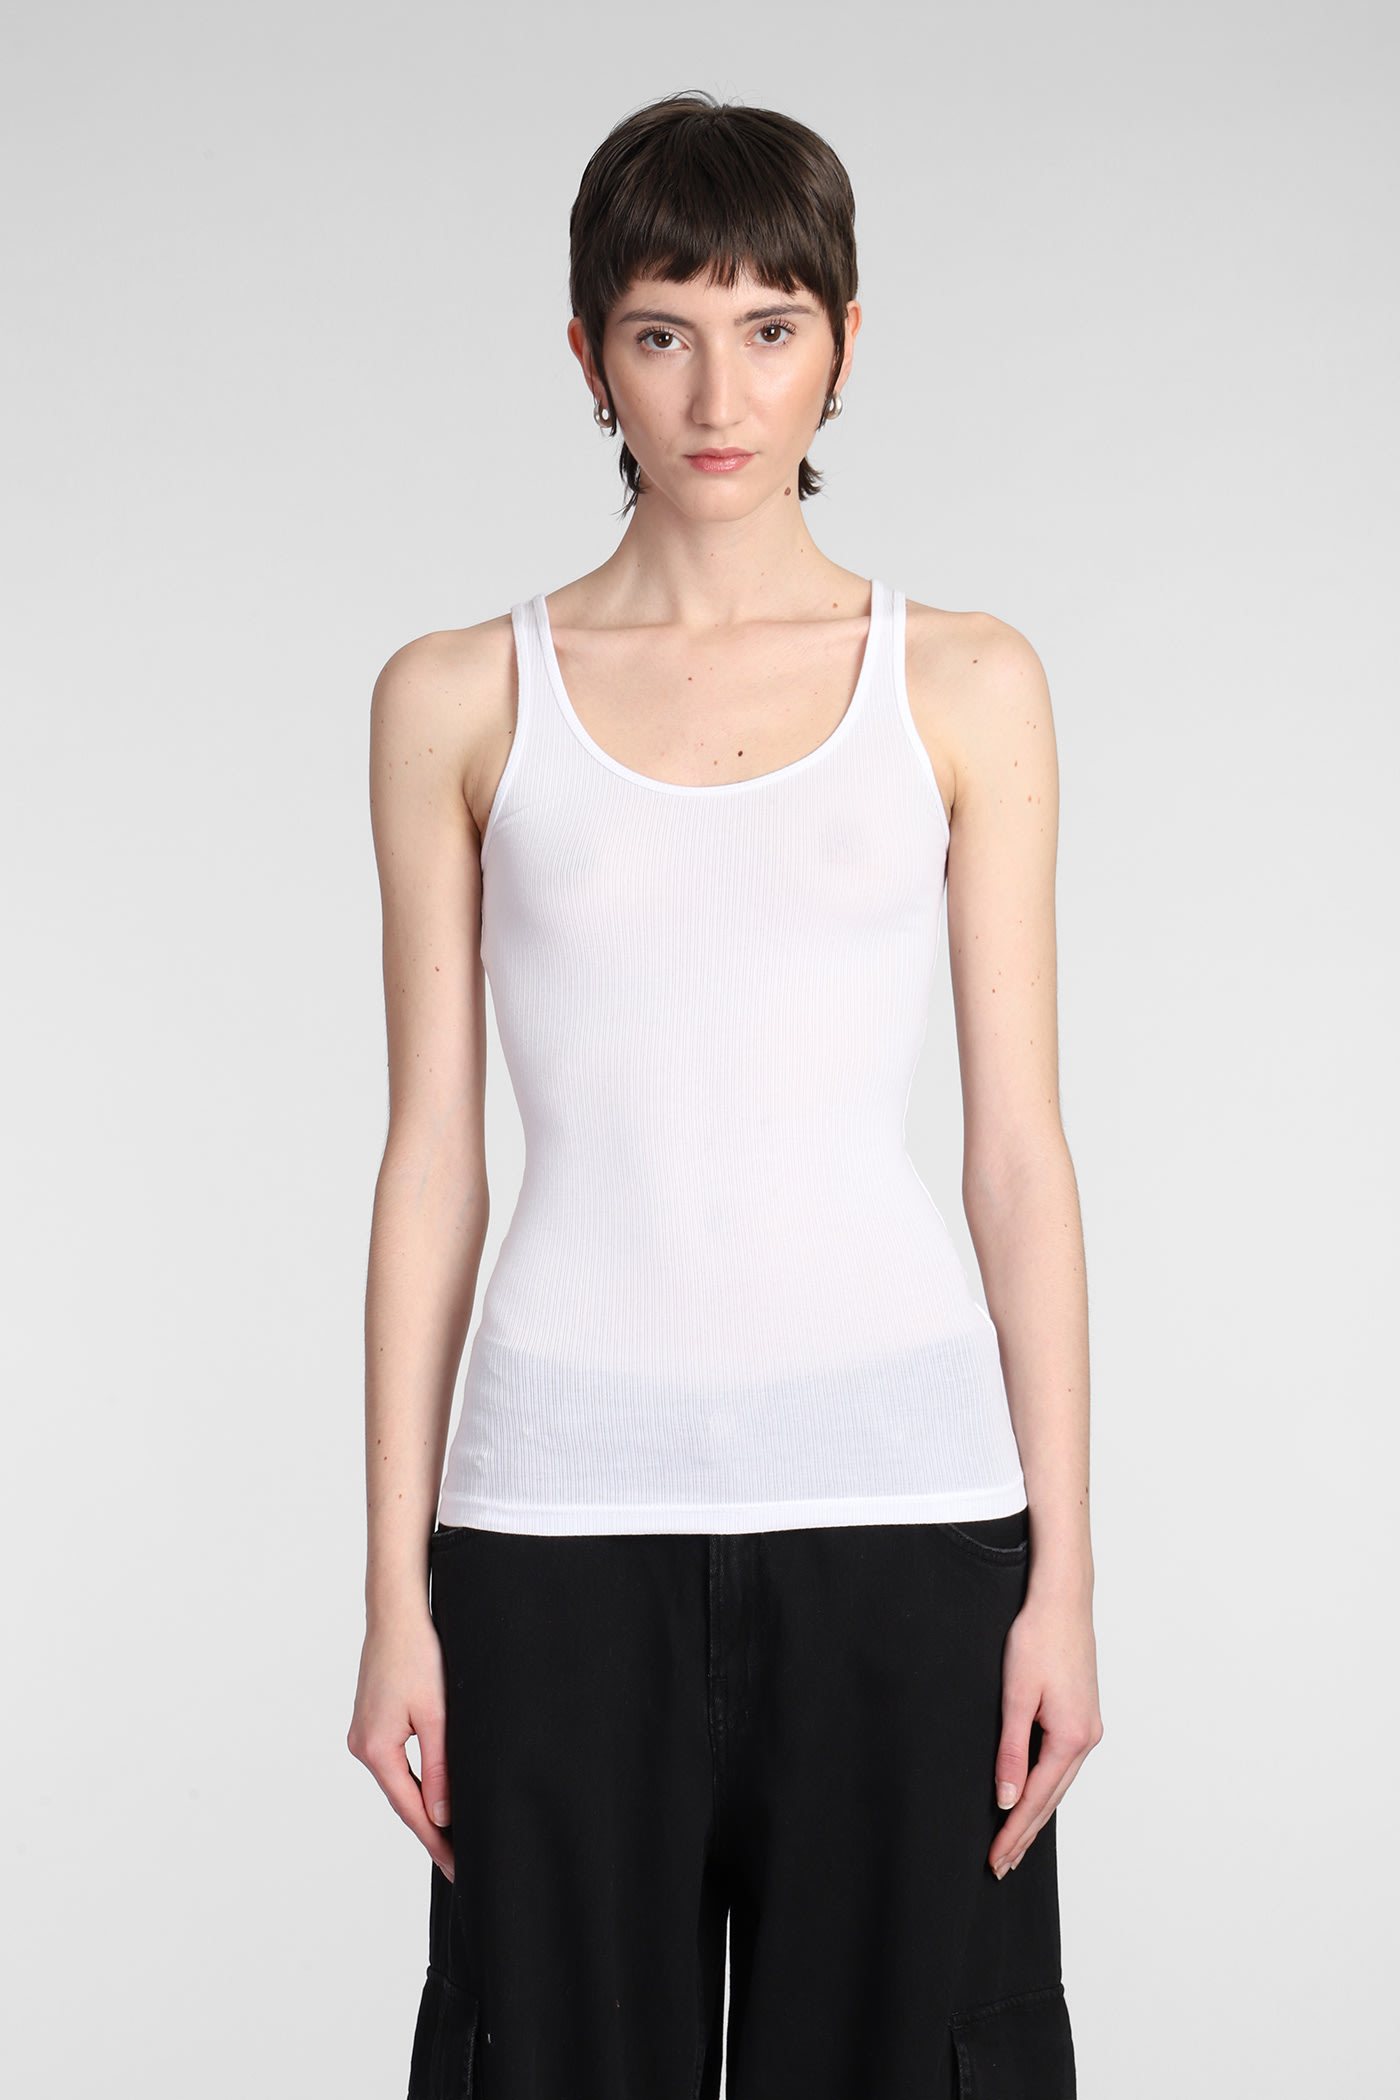 JAMES PERSE TANK TOP IN WHITE COTTON